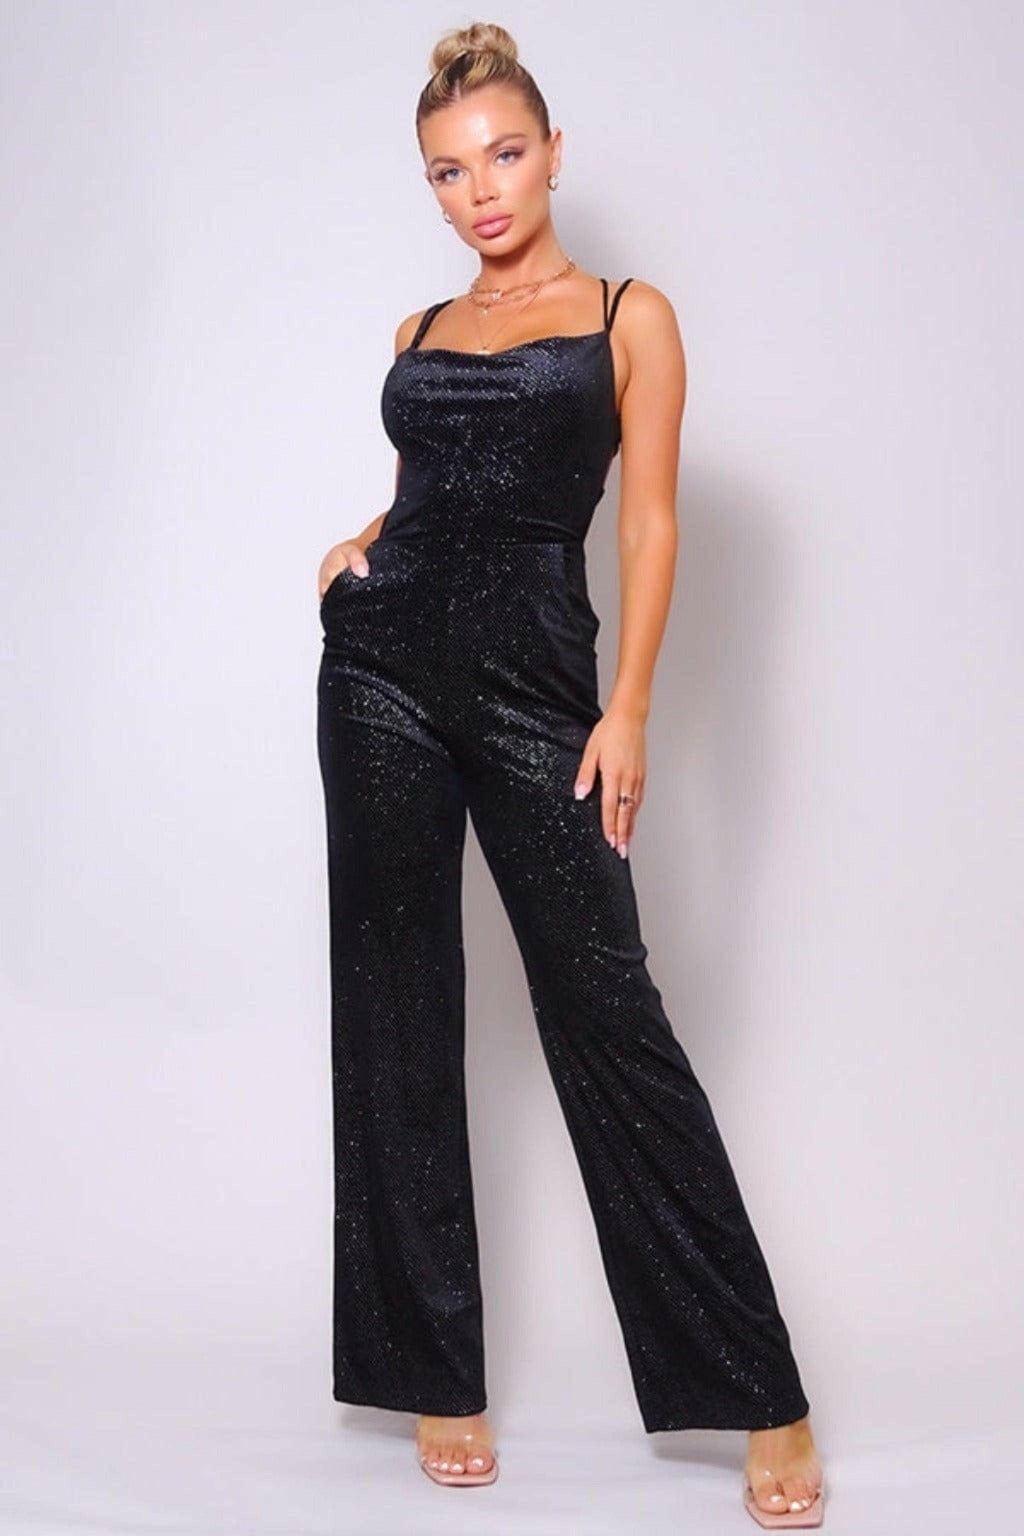 Epicplacess jumpsuits Small / BLACK / UNITED STATES SWEET BUT SASSY SPARKLE JUMPSUITS CR30127